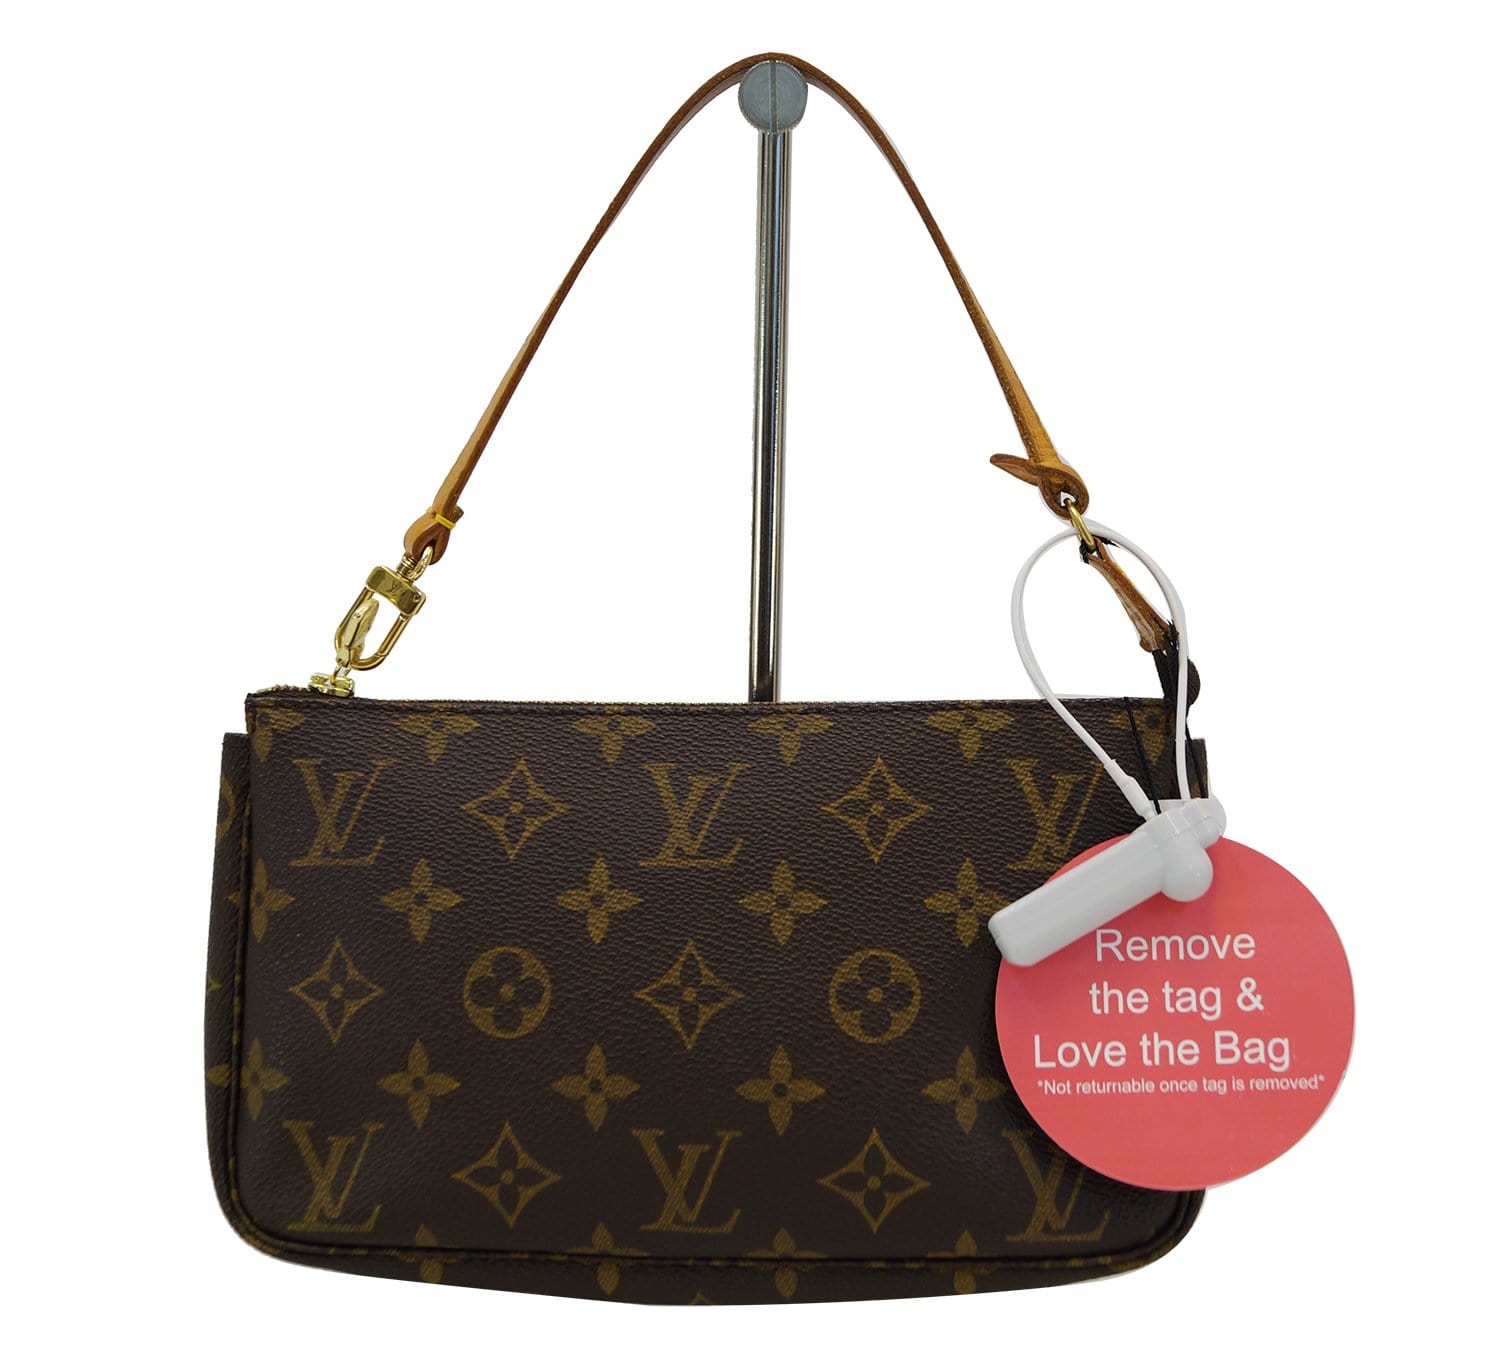 In LVoe with Louis Vuitton: Louis Vuitton Mini Bags